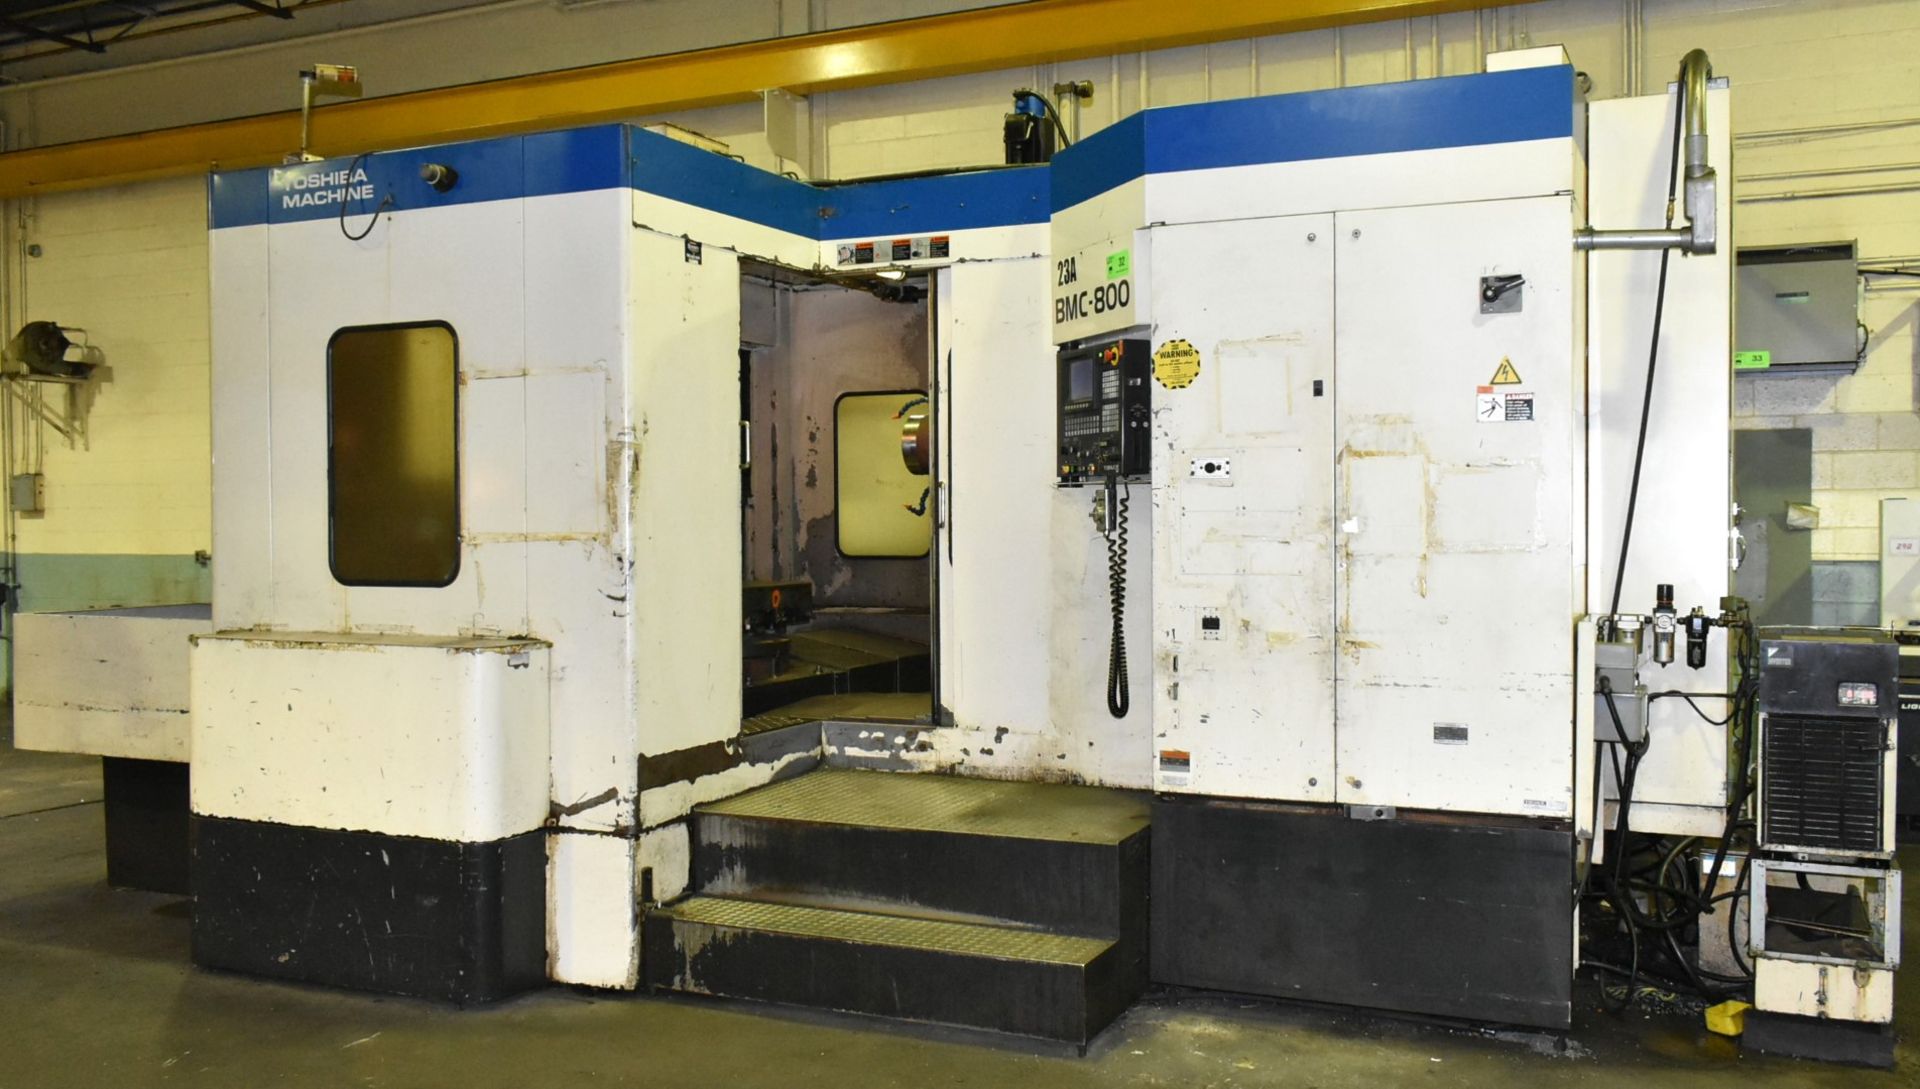 TOSHIBA BMC 800 CNC TWIN PALLET HORIZONTAL MACHINING CENTER WITH TOSNUC 8 CNC CONTROL, (2) 31.5" X - Image 2 of 8